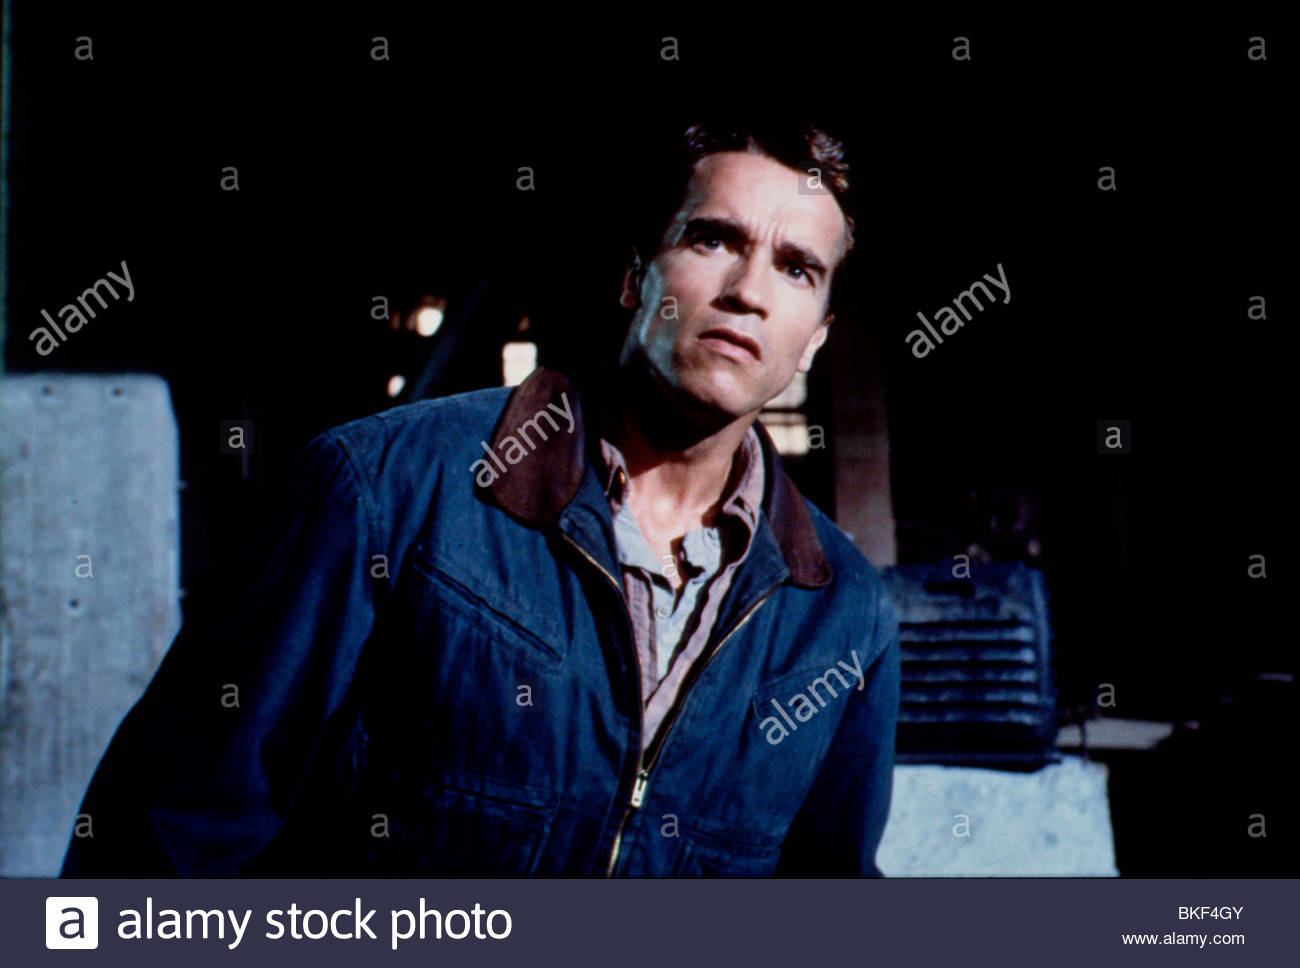 Amazing Total Recall (1990) Pictures & Backgrounds